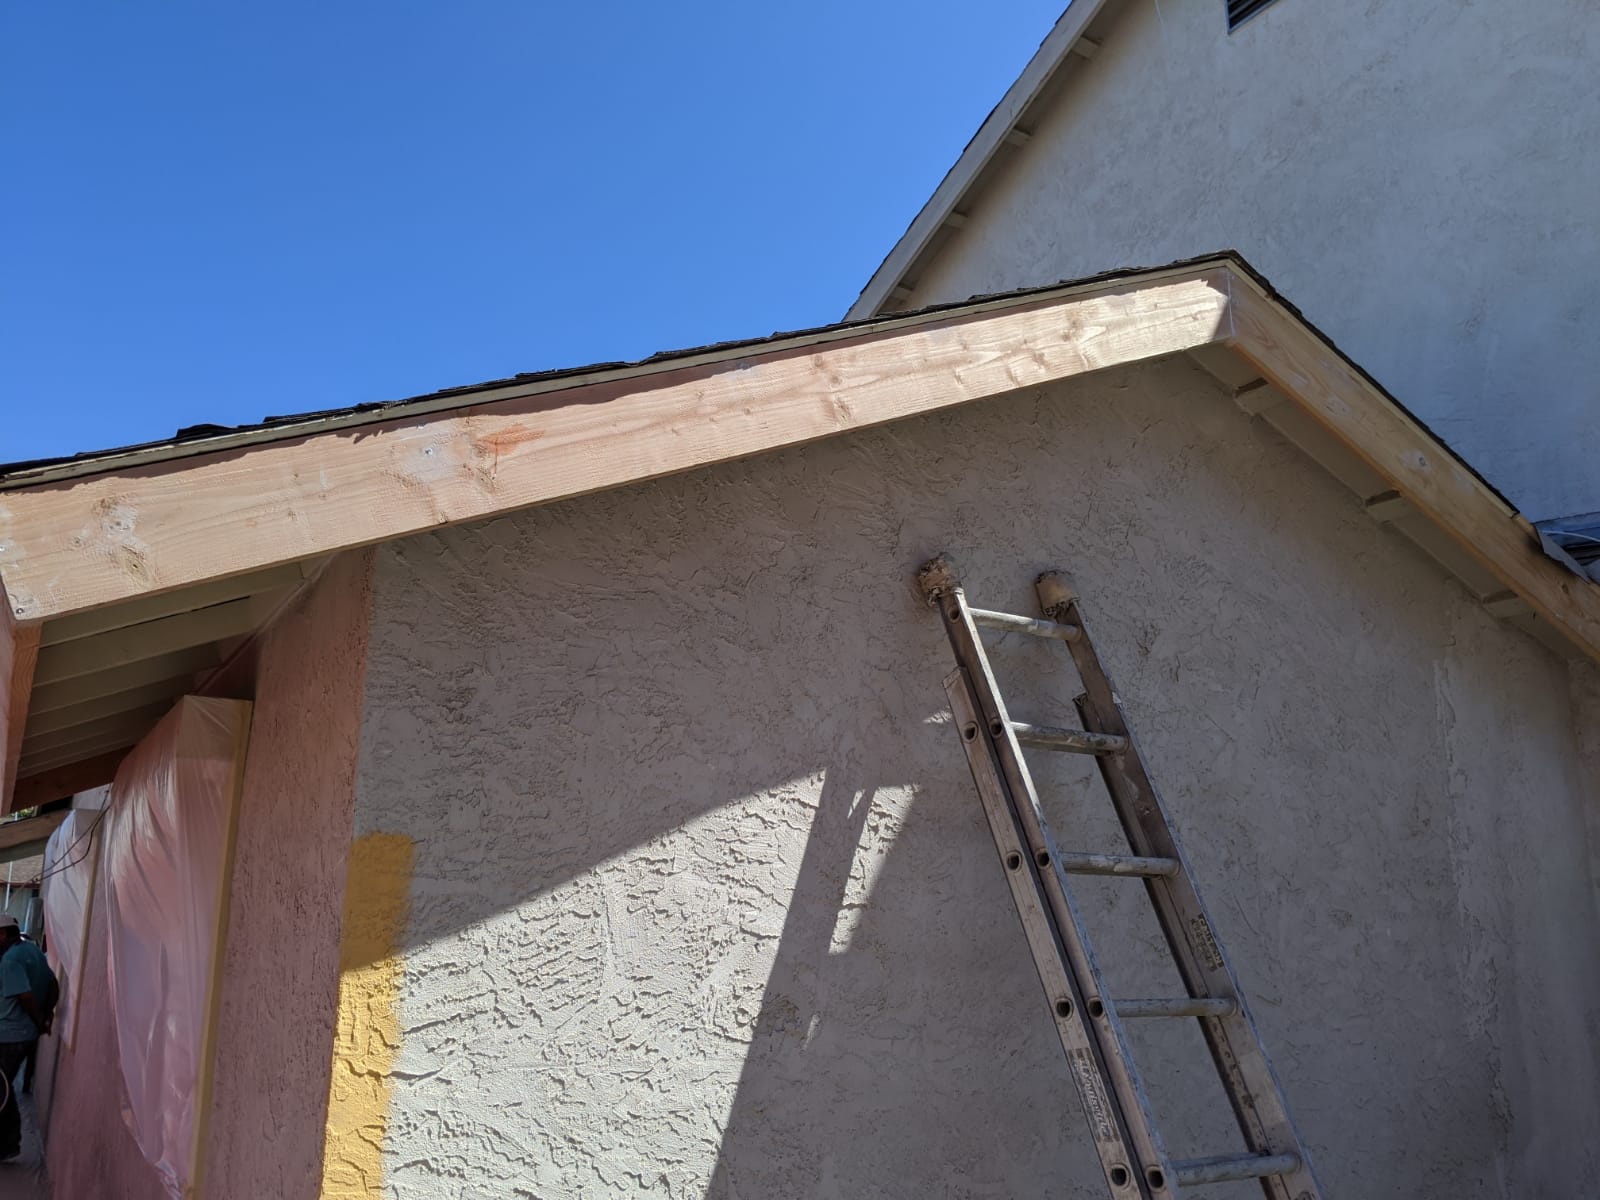 House Painting job in progress in San Diego 92114